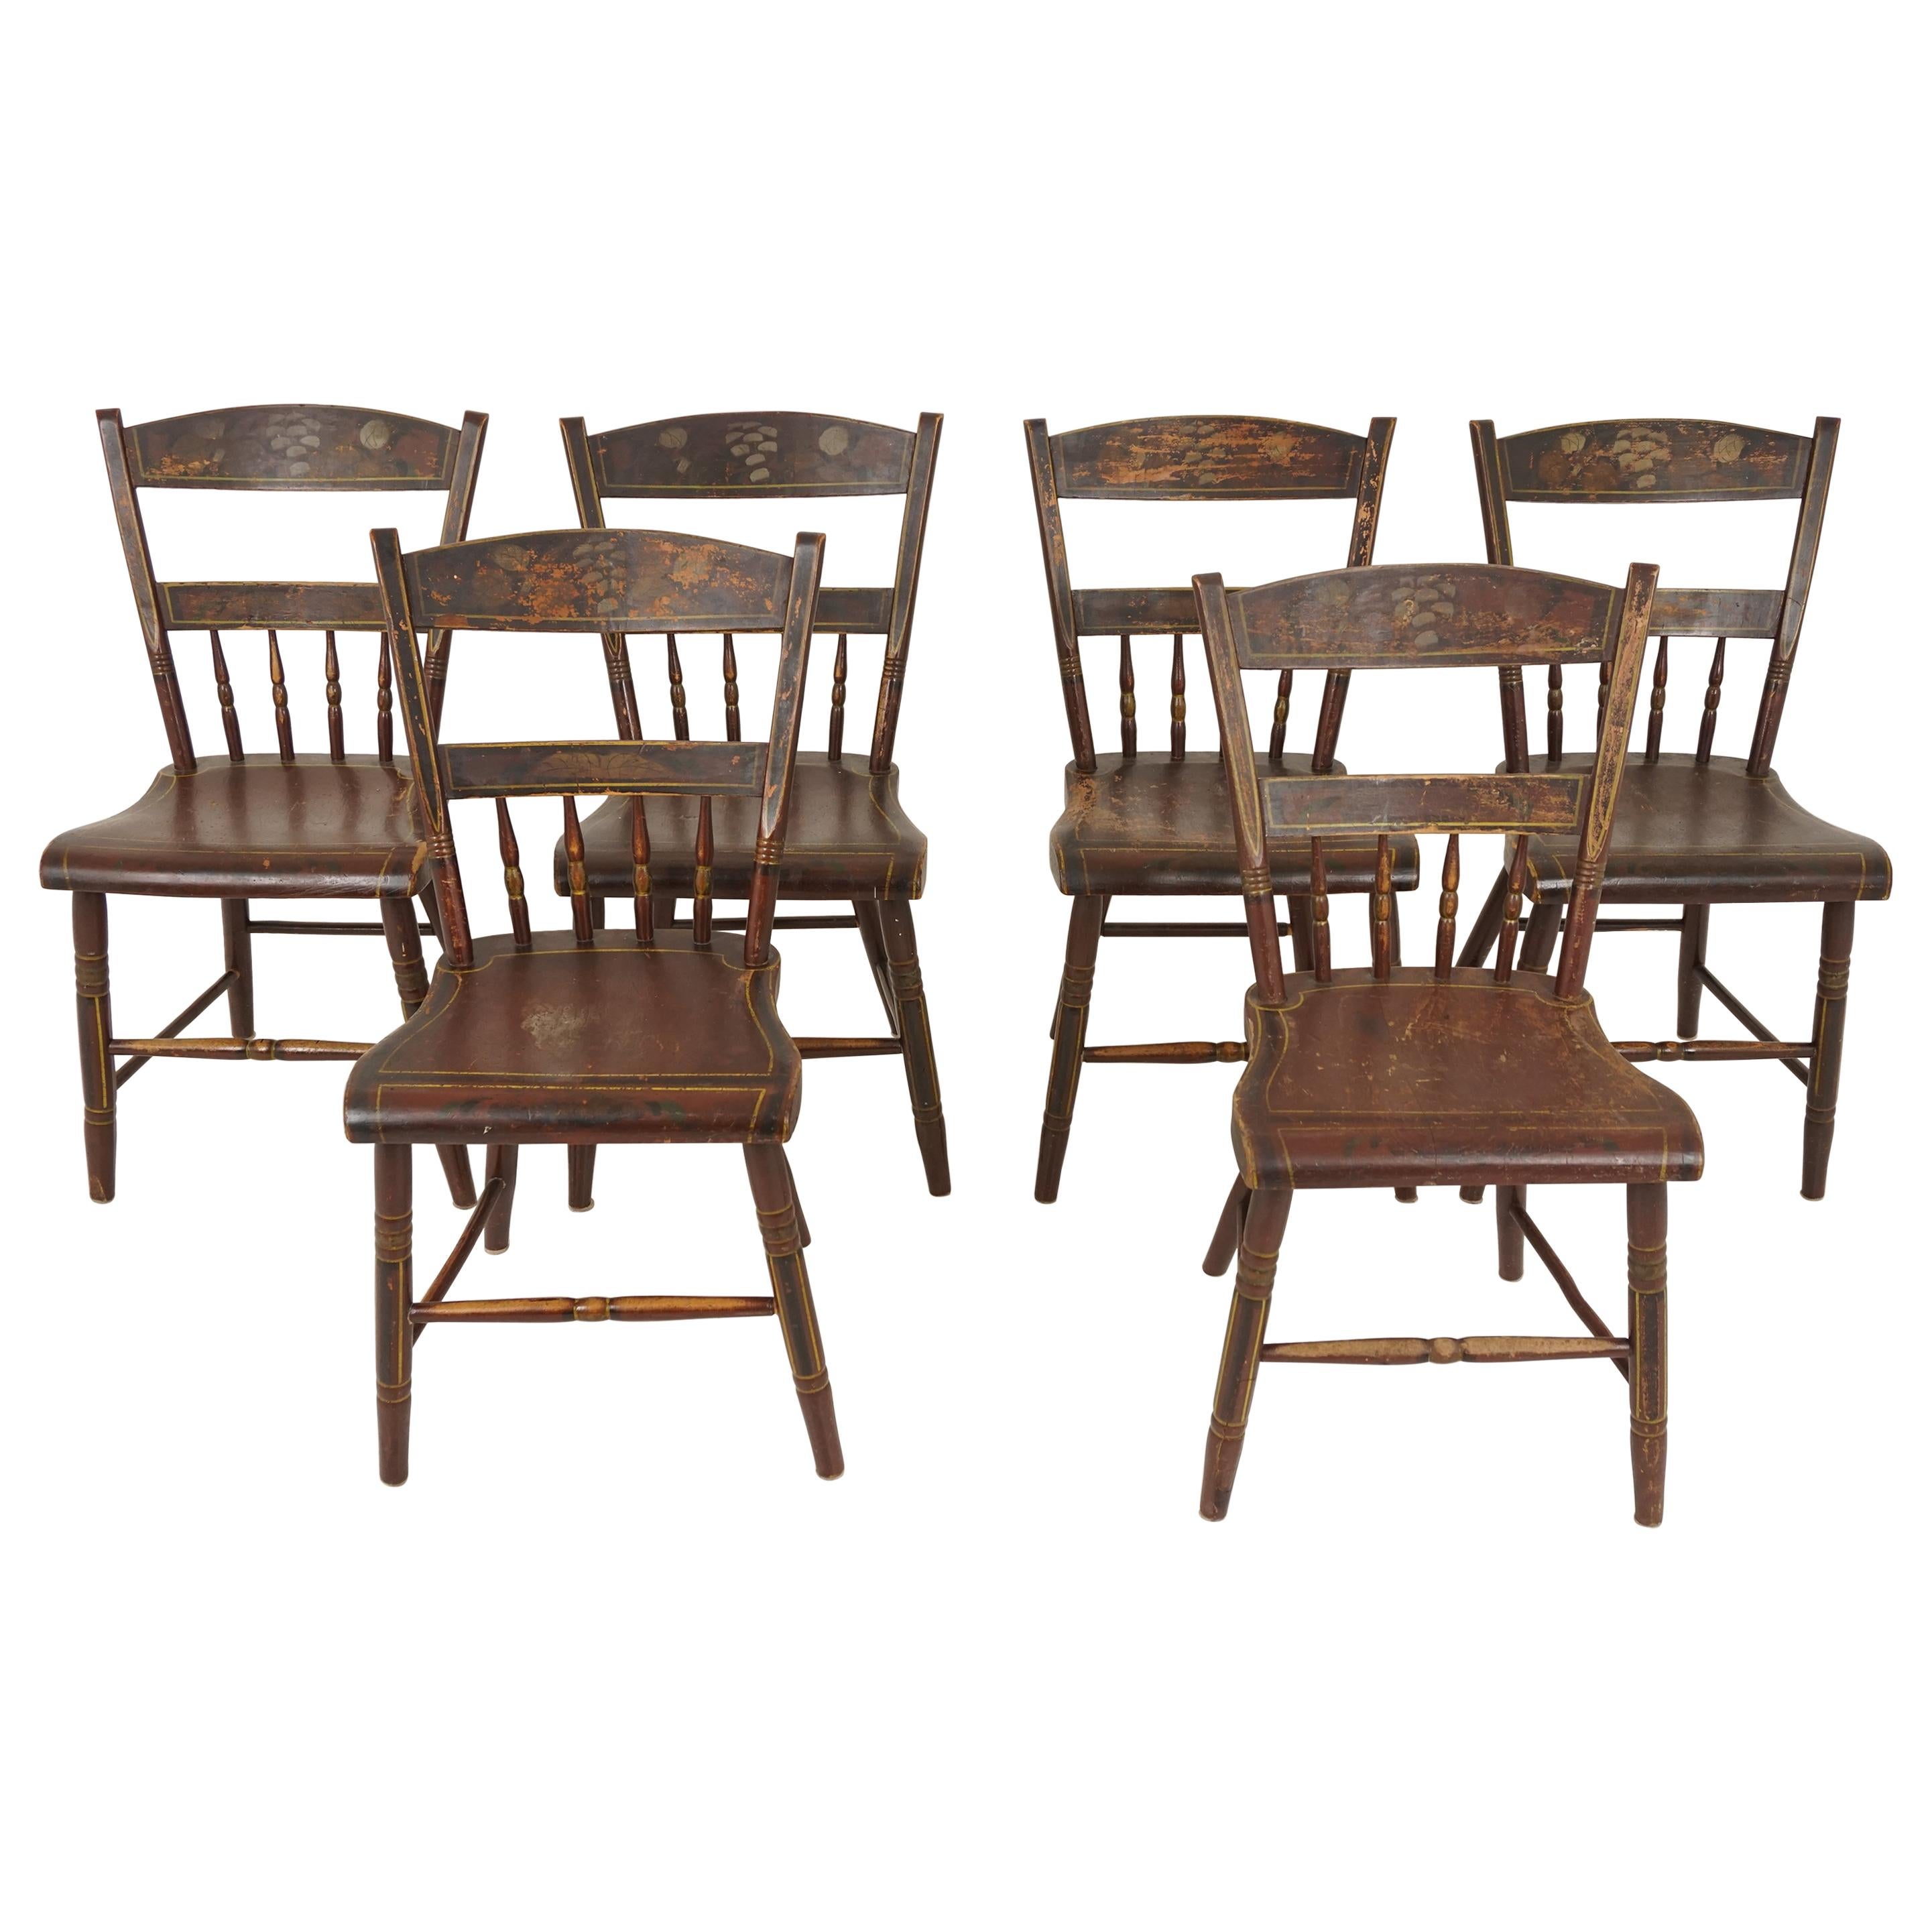 Antique Chairs, Set of 6, Pennsylvania Dutch Painted Plank Bottom Chairs, 1890s